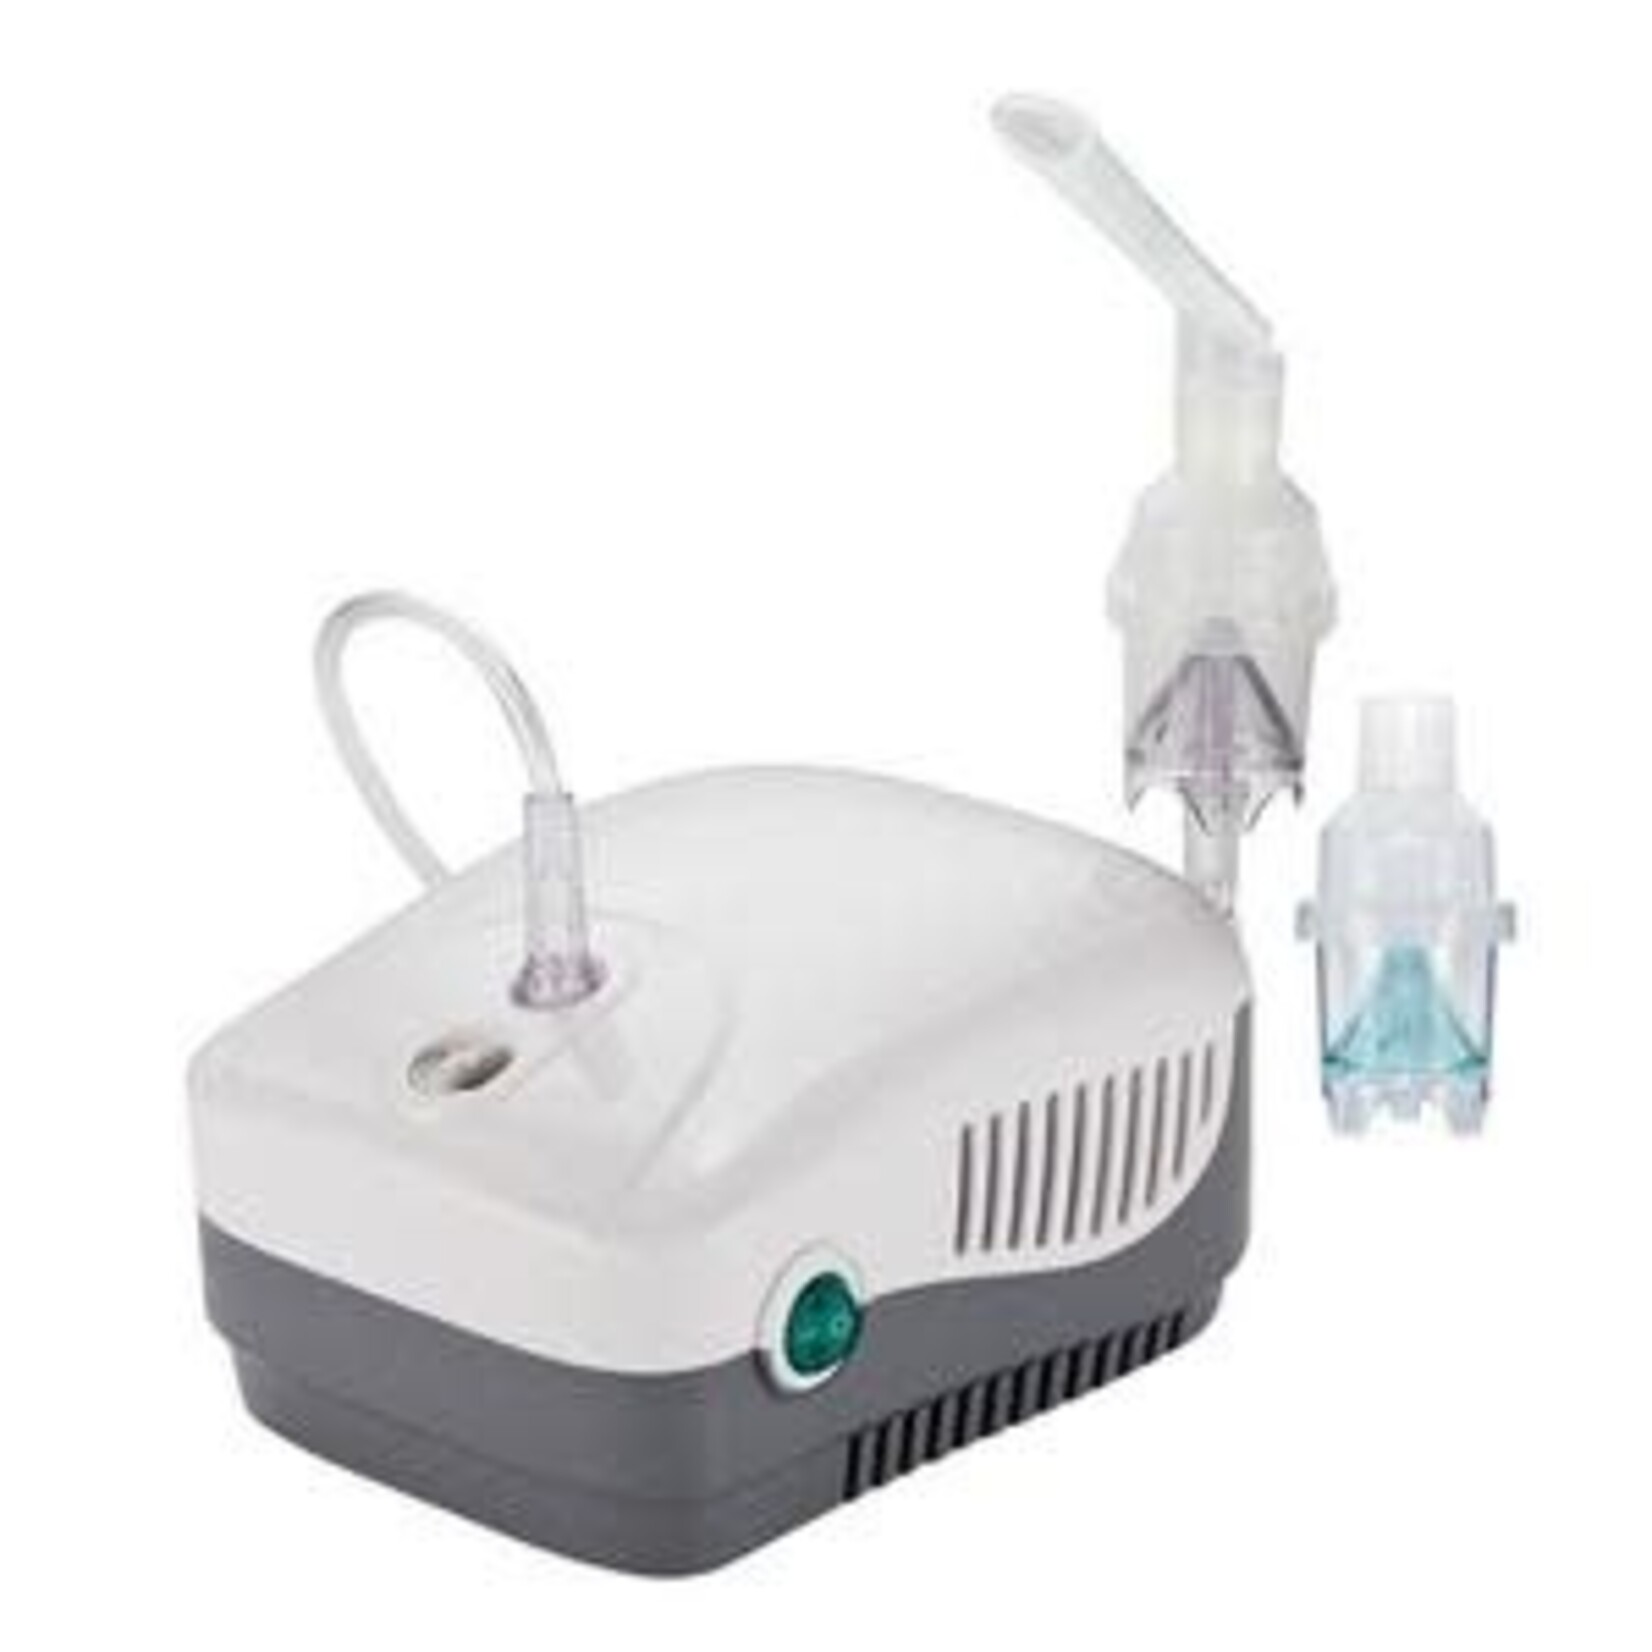 DRIVE Drive MEDNEB Plus Compressor Nebulizer, with Reusable and Disposable Neb Kit